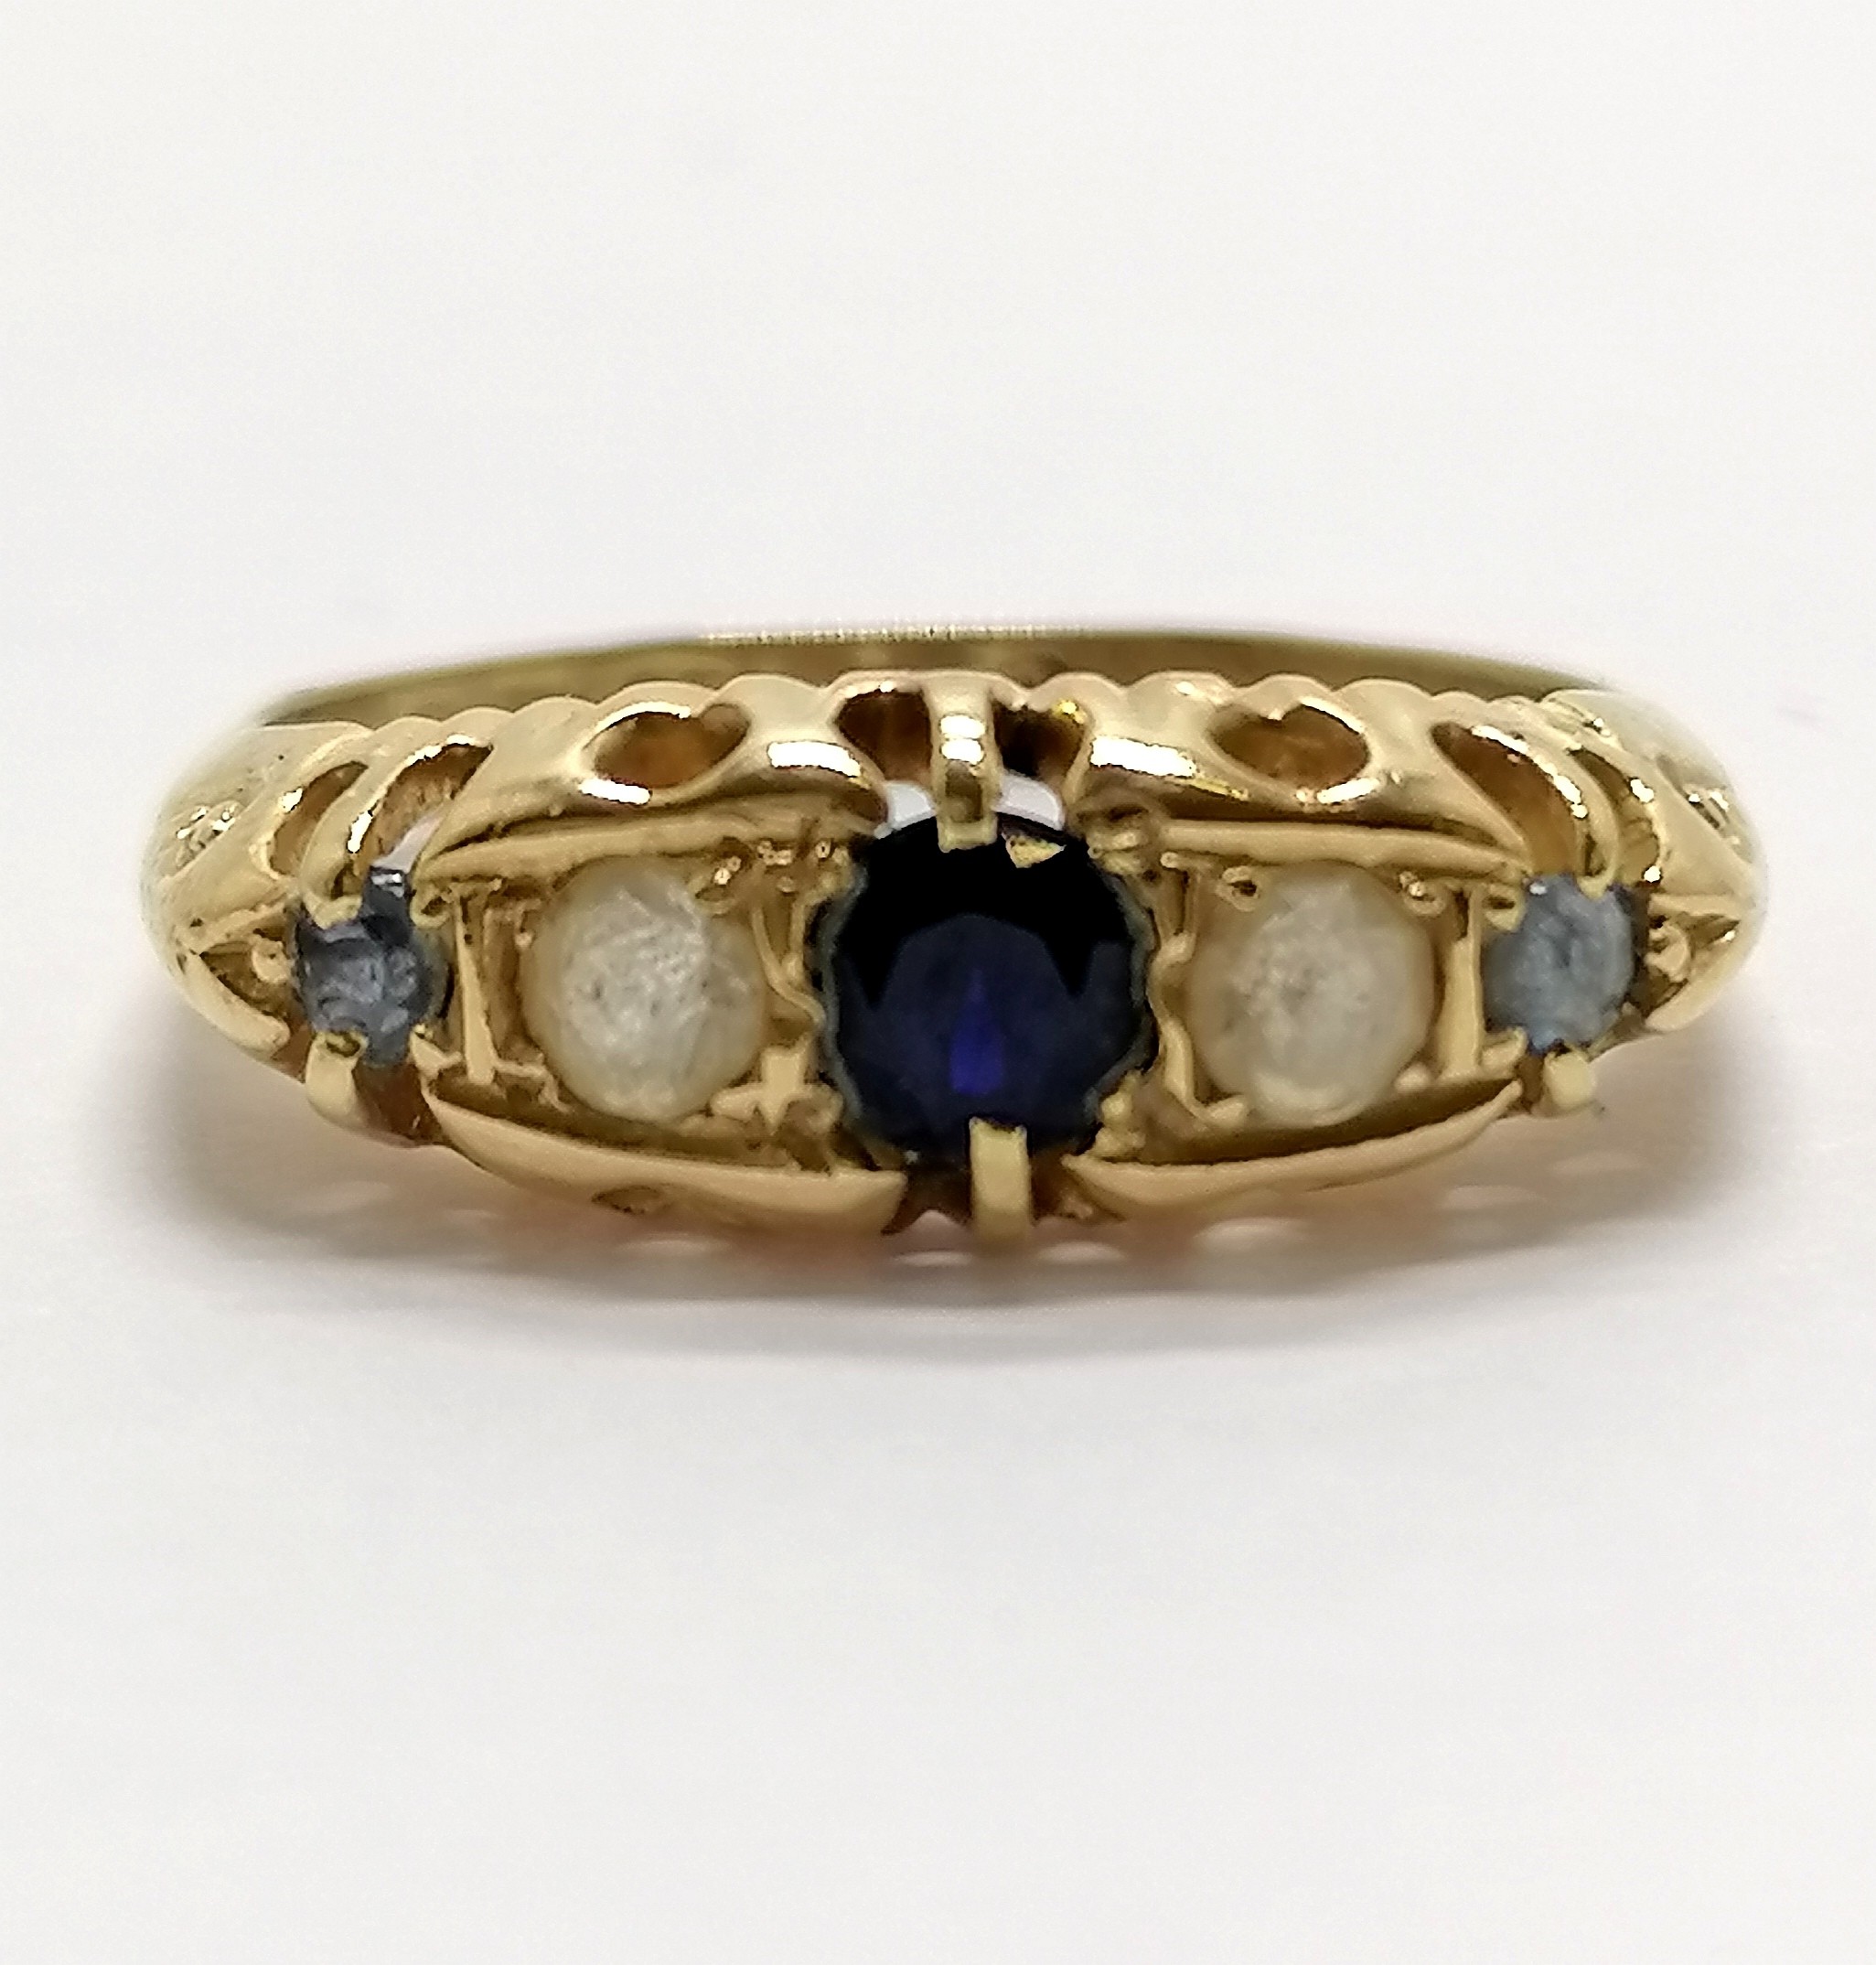 Antique 18ct hallmarked gold sapphire / white stone set ring - size H½ & 2.3g total weight - Image 4 of 4